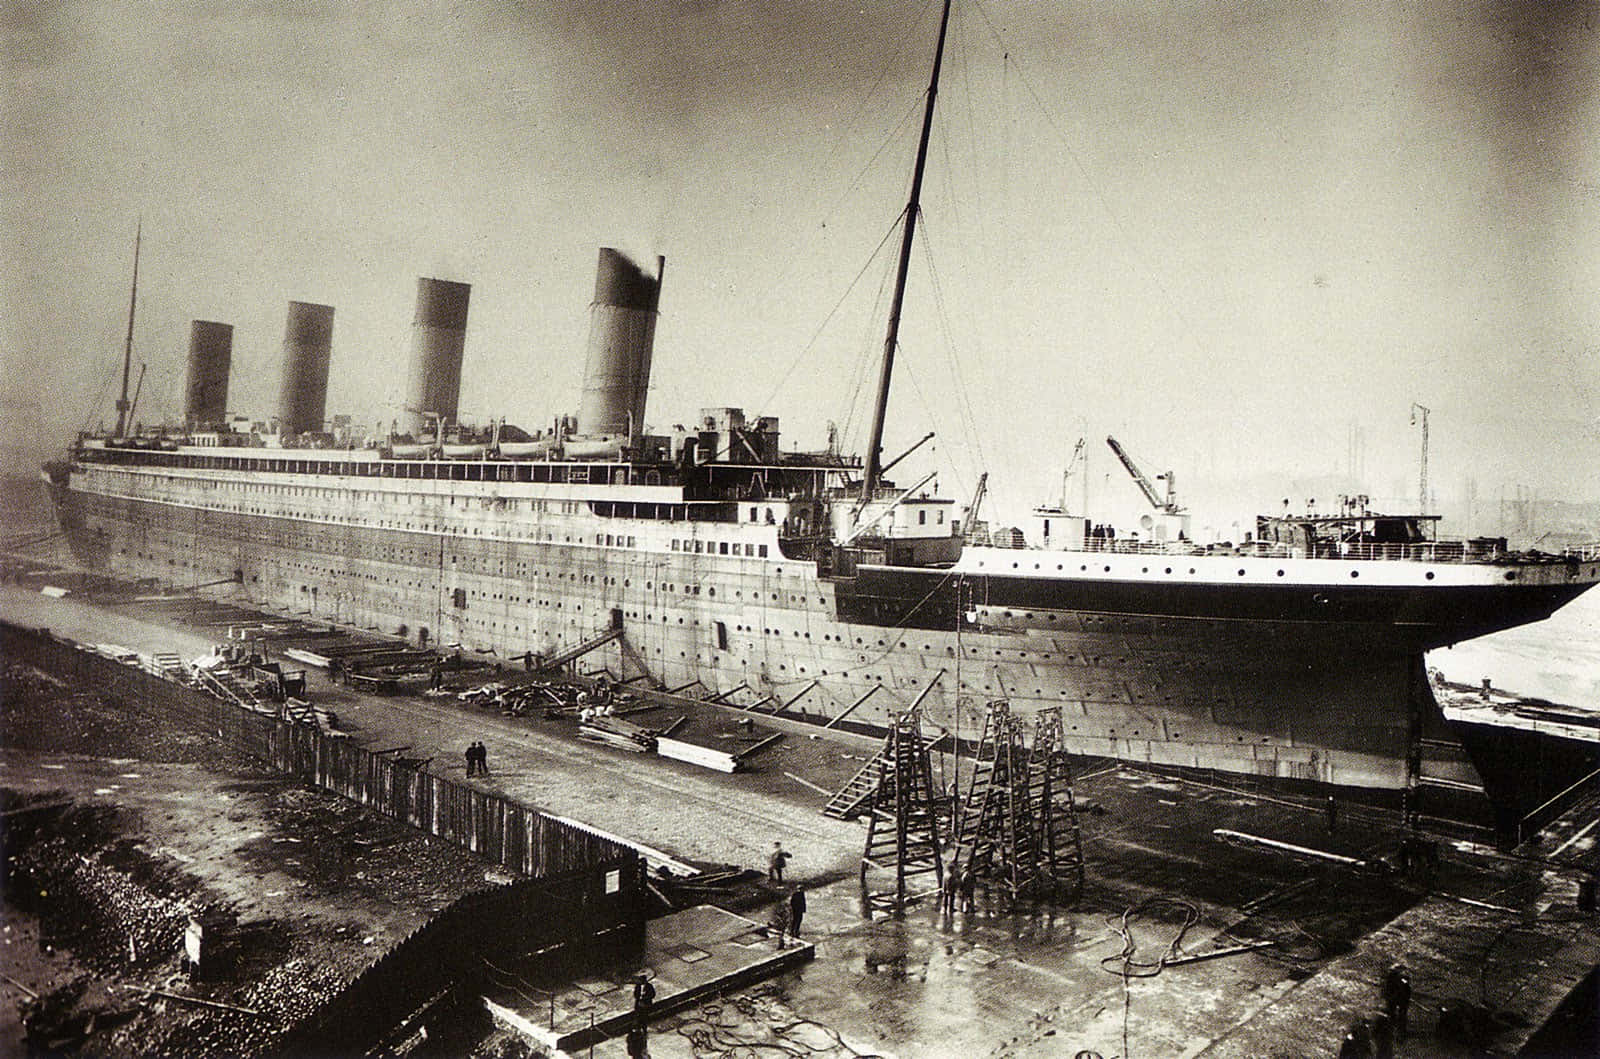 The fateful voyage of the Titanic